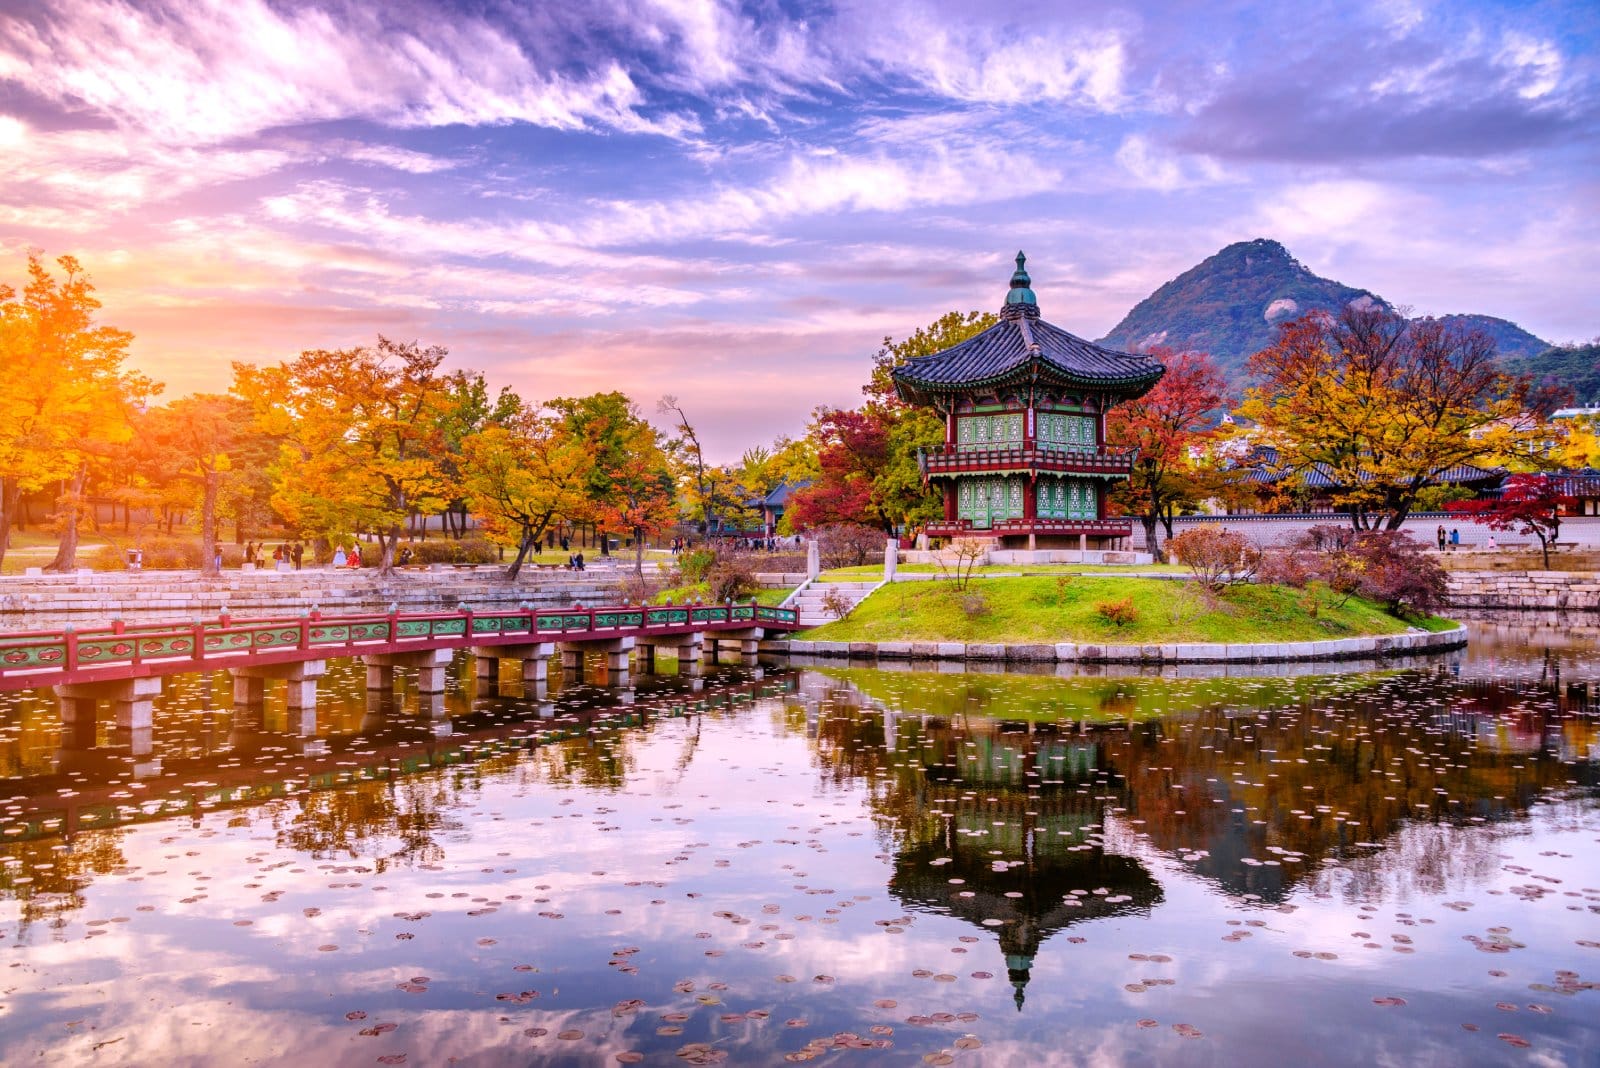 <p class="wp-caption-text">Image Credit: Shutterstock / TRAVEL TAKE PHOTOS</p>  <p><span>Seoul, a city where ancient palaces stand alongside towering skyscrapers, offers a fascinating study-abroad experience for students interested in technology, business, and Korean language and culture. The city’s universities are known for their high academic standards and innovative research. Seoul’s vibrant street food scene, K-pop culture, and historic sites like the Gyeongbokgung Palace provide a rich cultural immersion experience. Seoul’s commitment to technological advancement and sustainability can also be seen in its smart city initiatives and green spaces.</span></p>